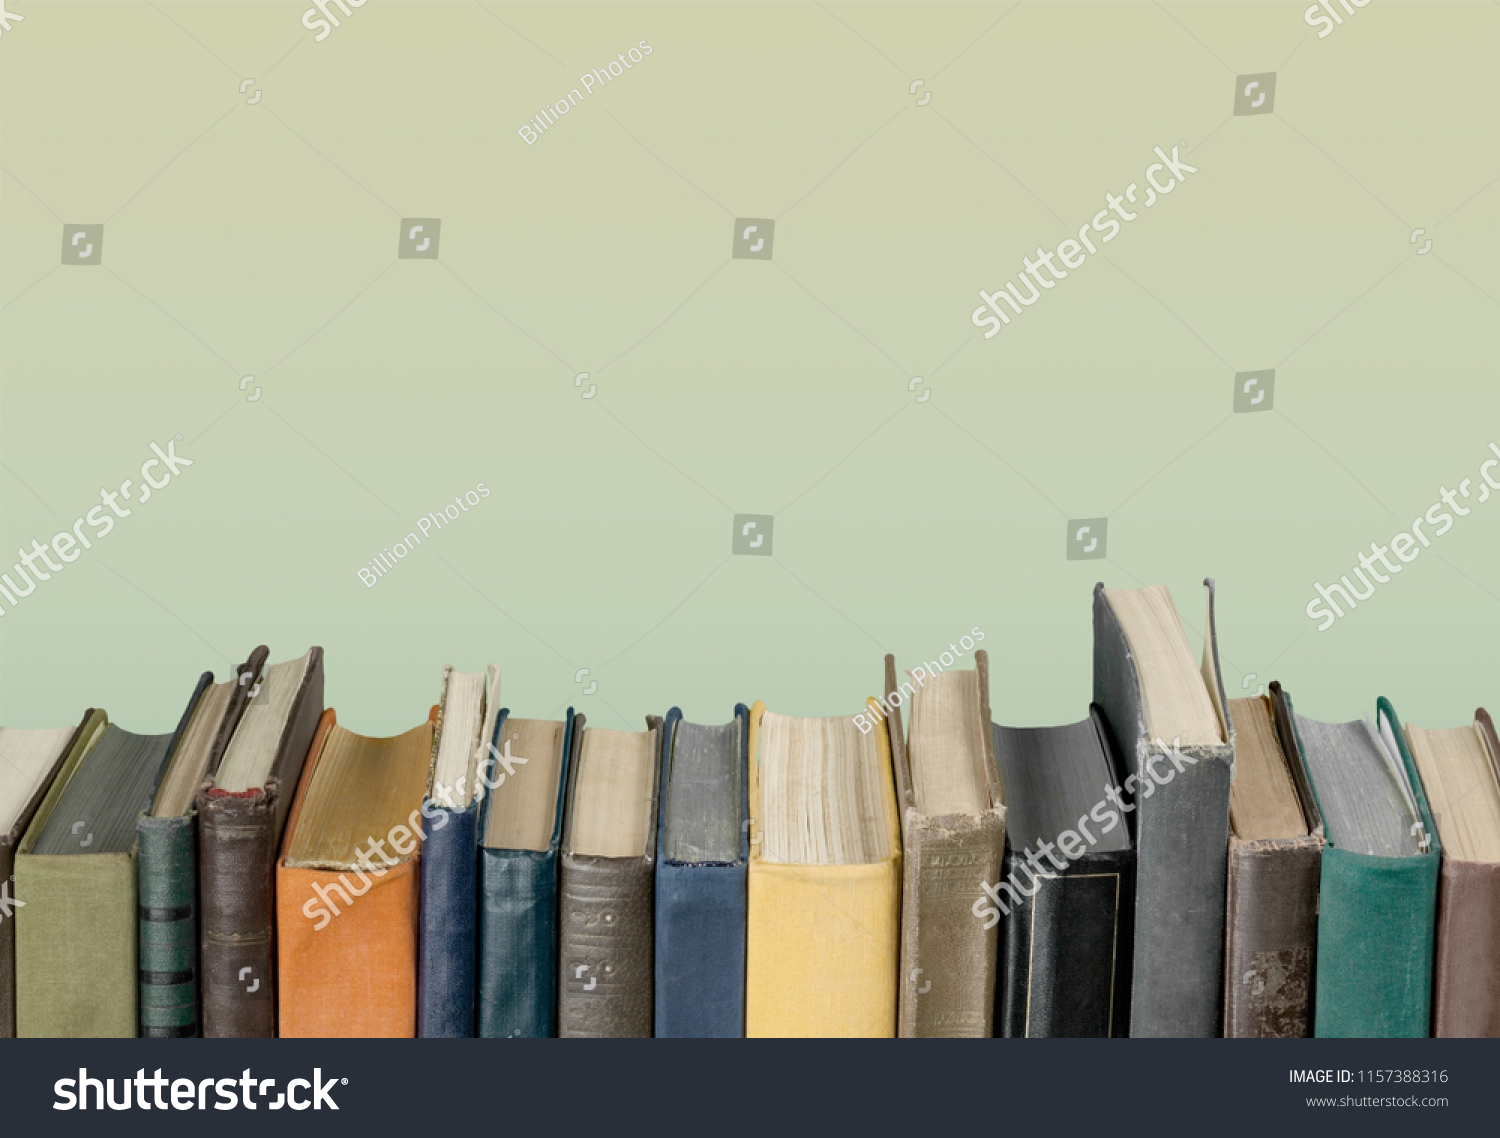 Collection of old books  on background #1157388316